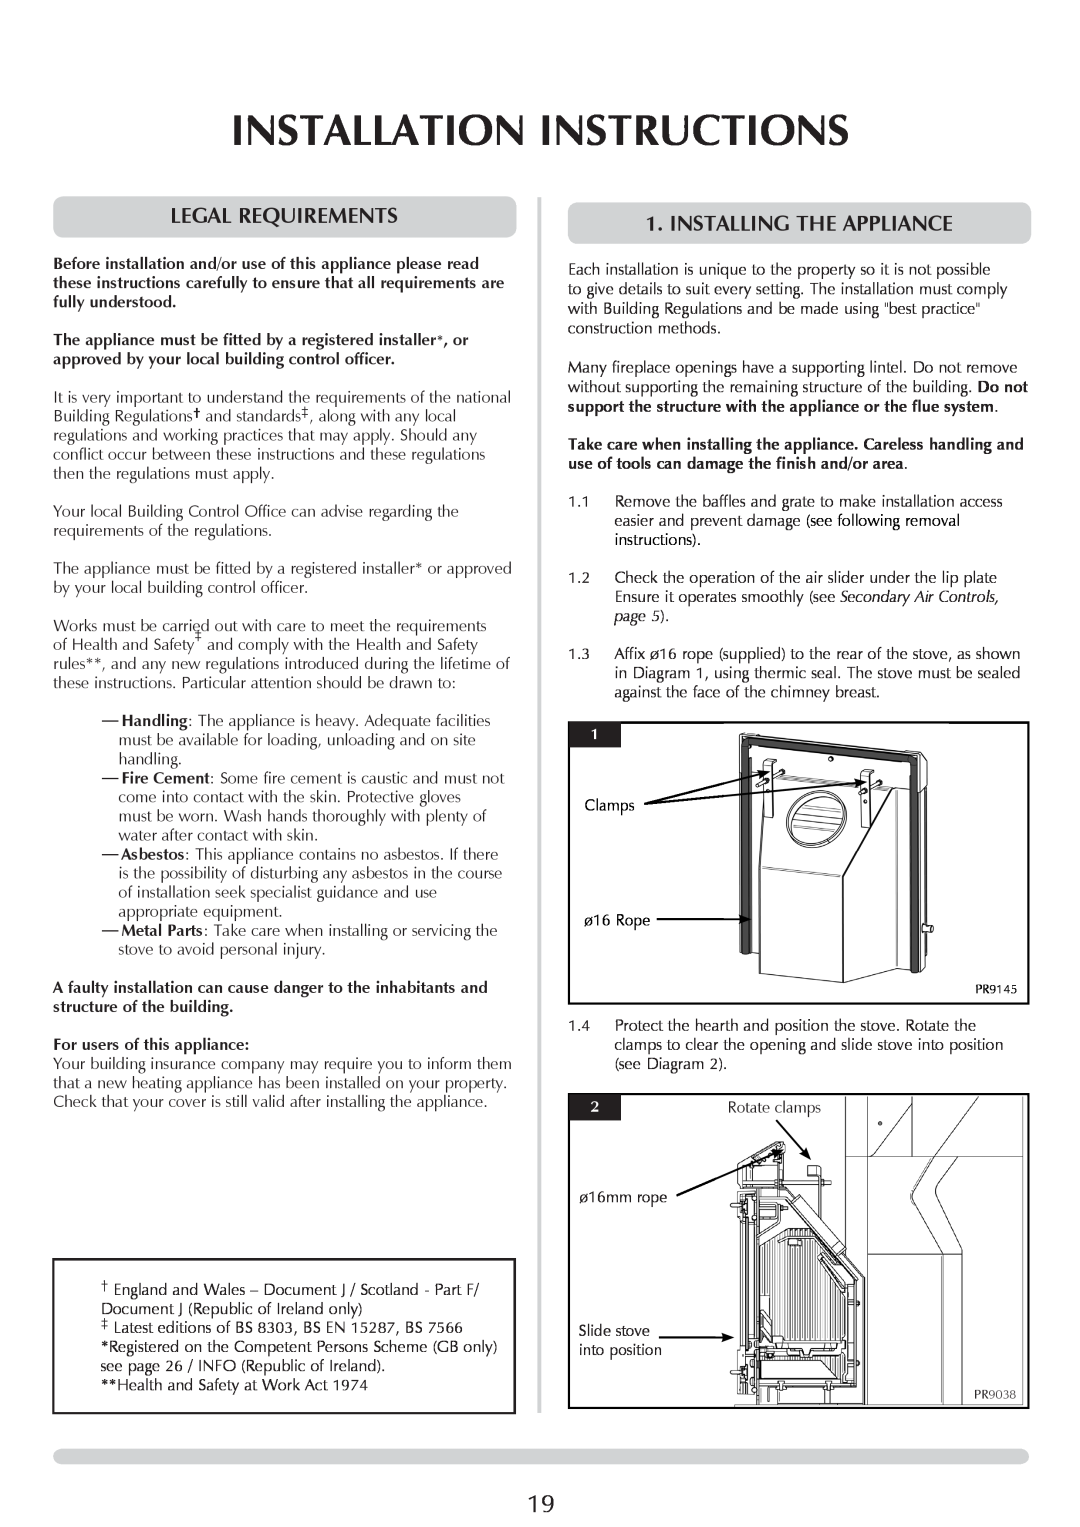 Yeoman YMMB manual Installation Instructions, Legal requirements, INSTALLING THE Appliance 